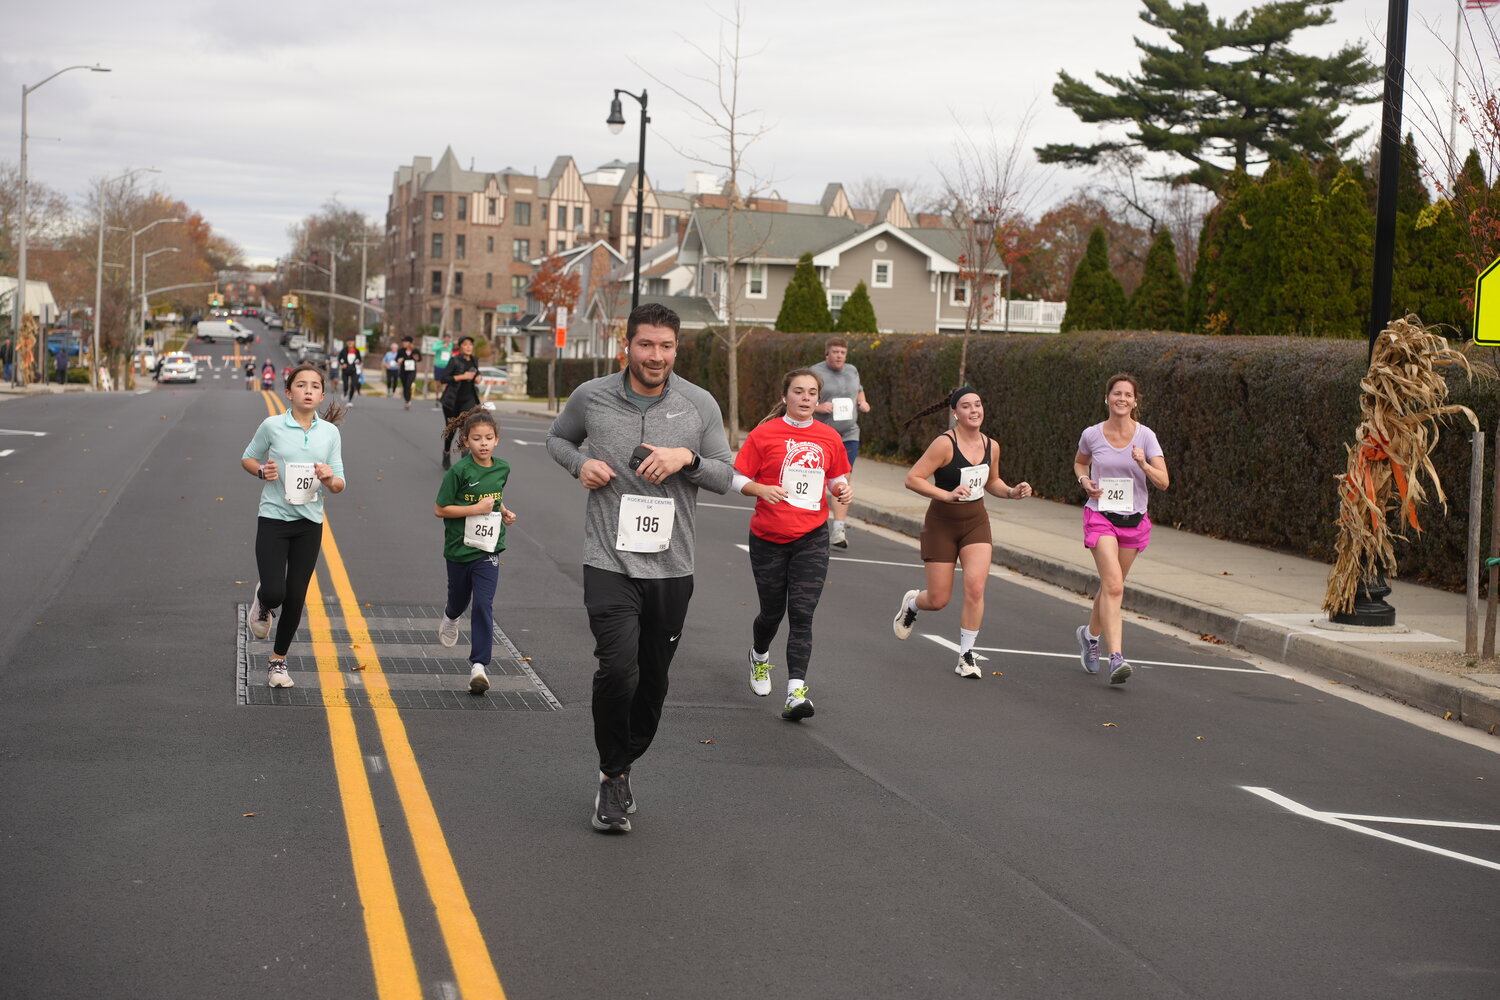 Runners continued down North Village Avenue towards the finish line on Front Street.